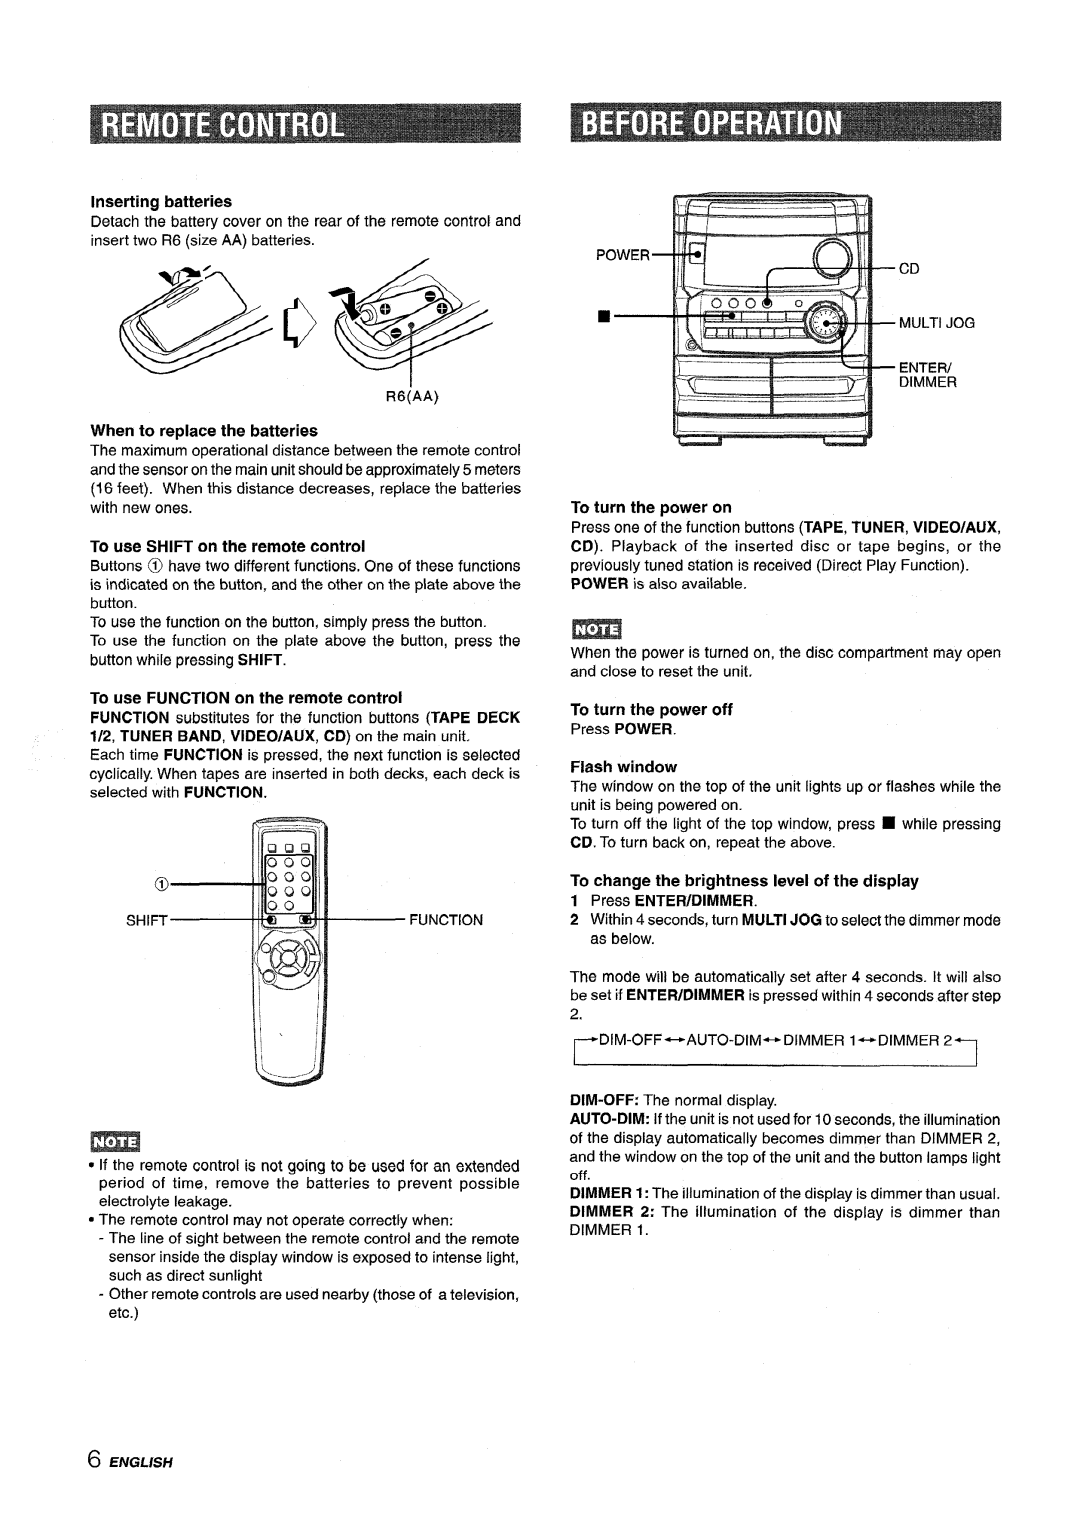 Aiwa CX-NA222 When to replace the batteries, To use Shift on the remote control, To use Function on the remote control 